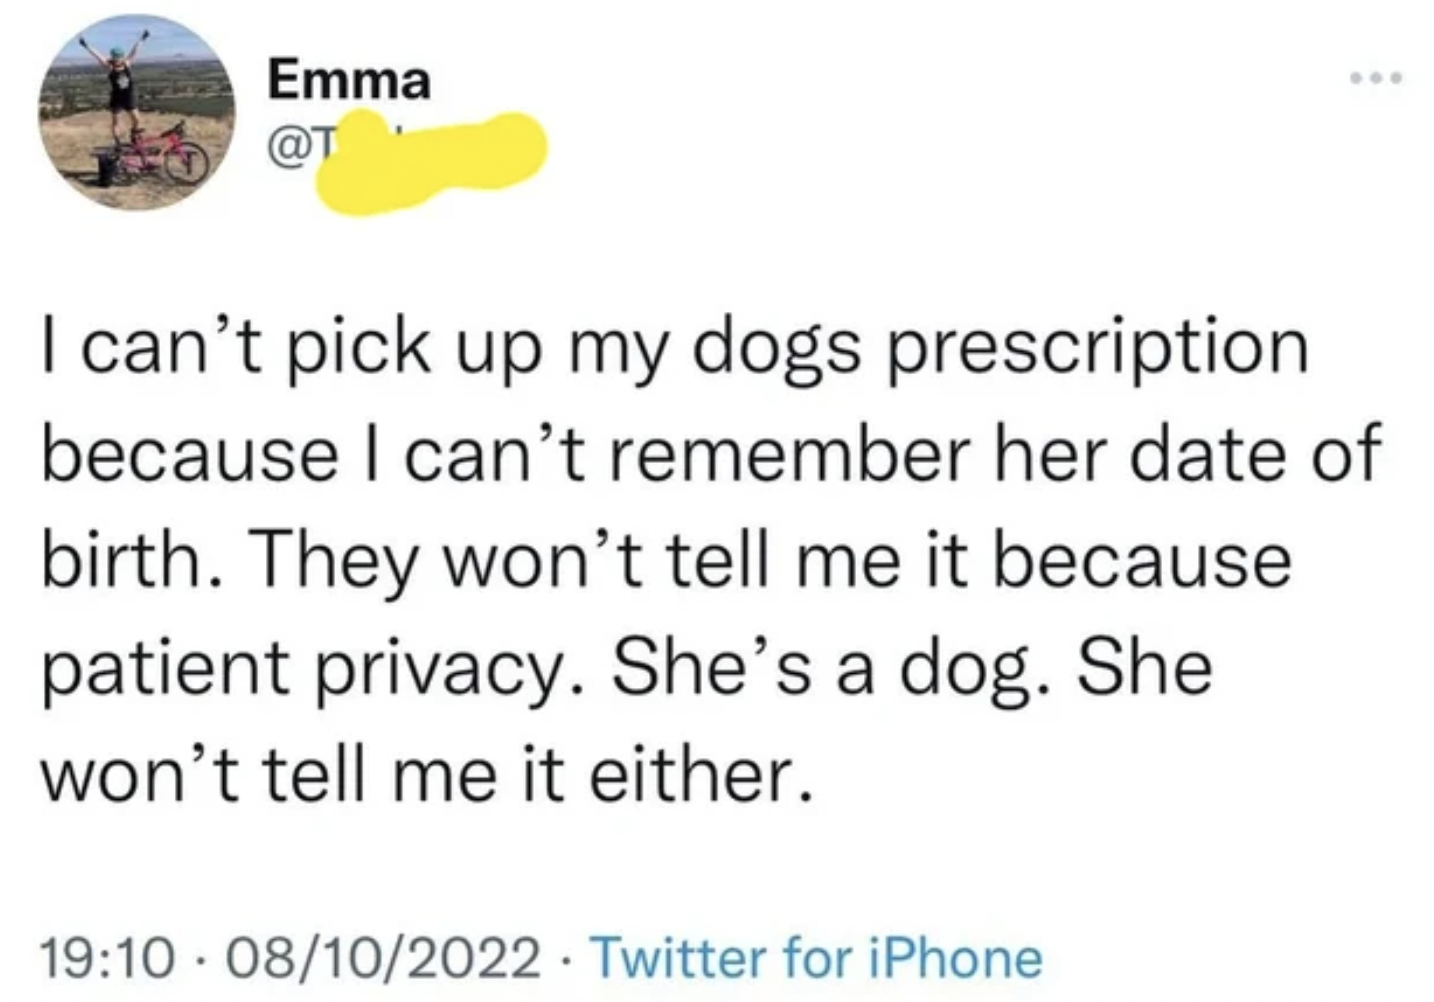 I can't pick up my dogs prescription because I can't remember her date of birth. They won't tell me it because patient privacy. She's a dog. She won't tell me it either